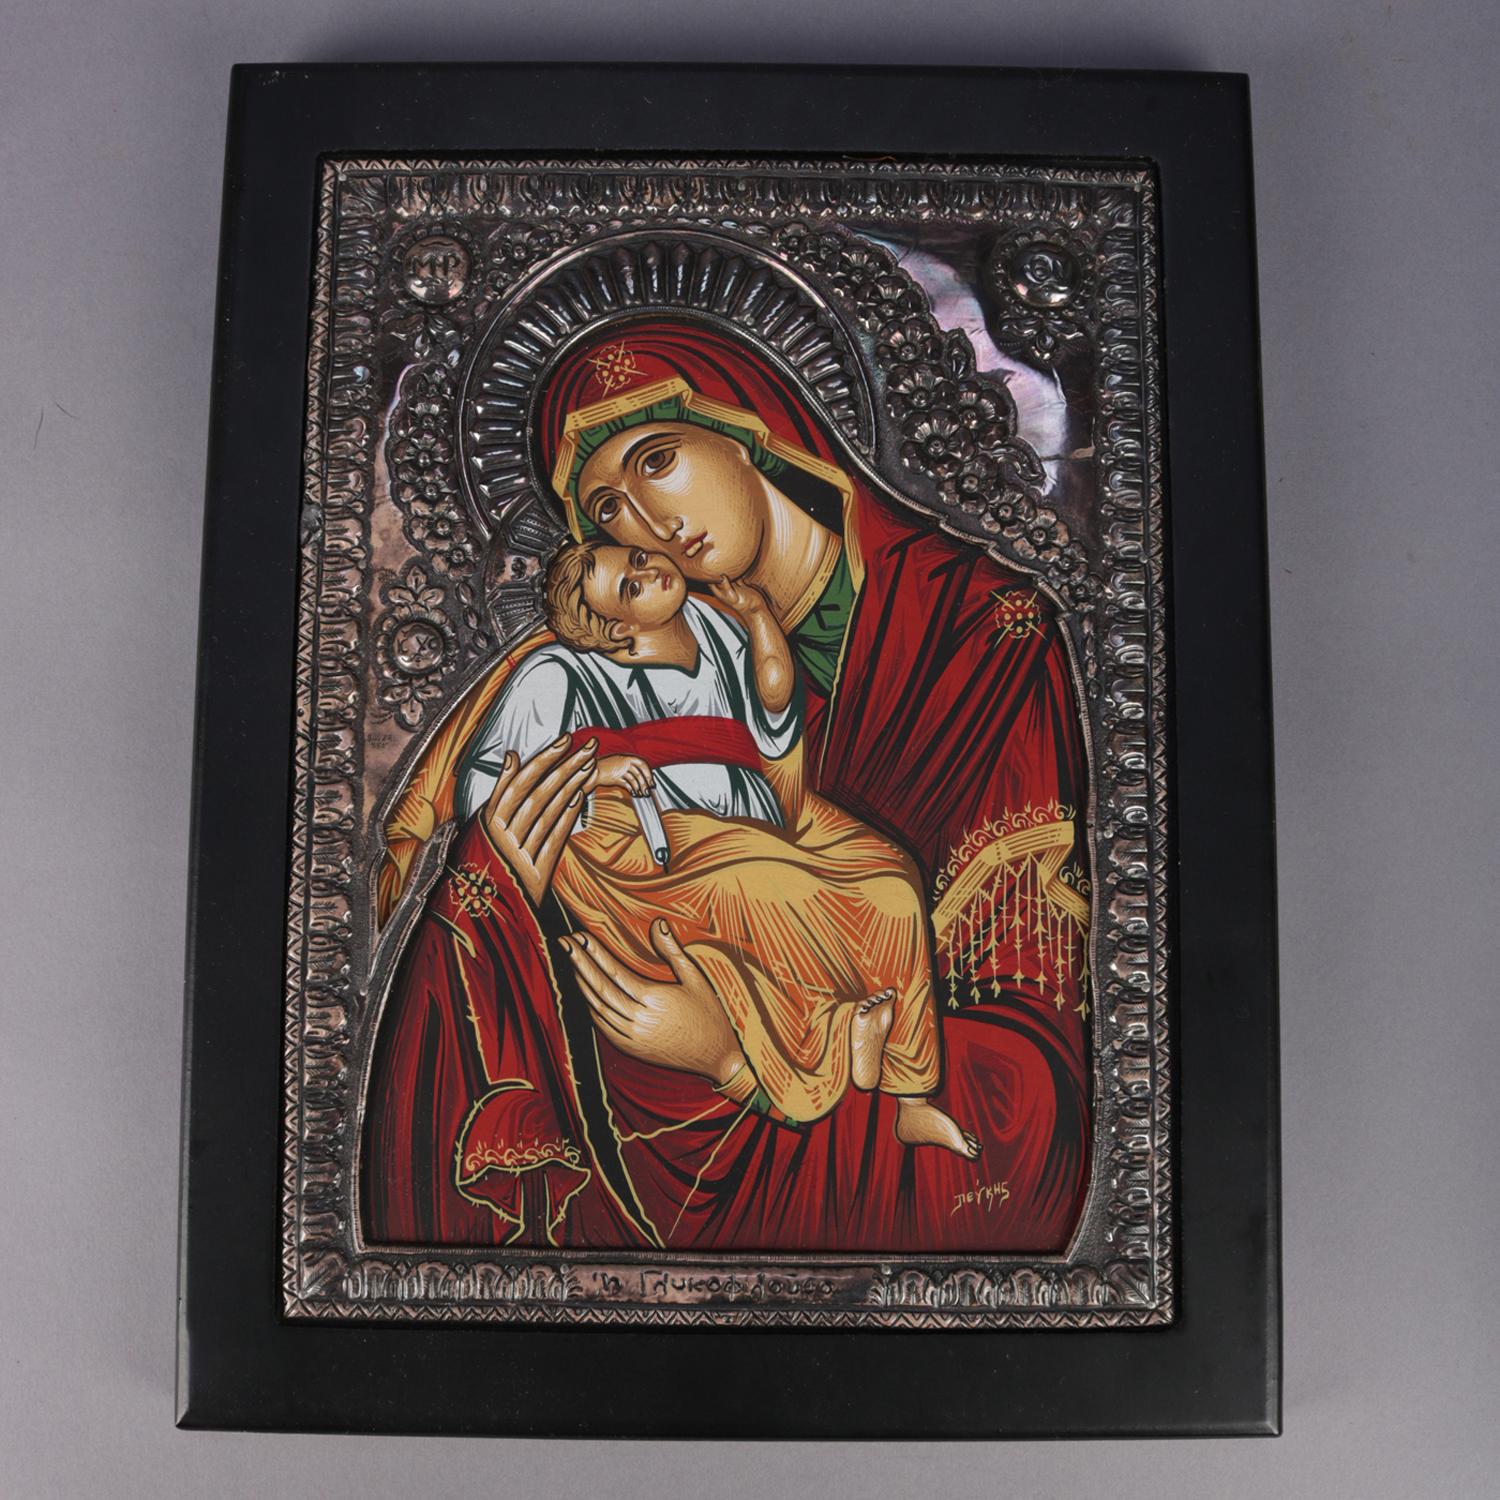 Classical Greek Italian Mother Mary & Christ Child Signed Icon after Padre Pefkis, 20th Century